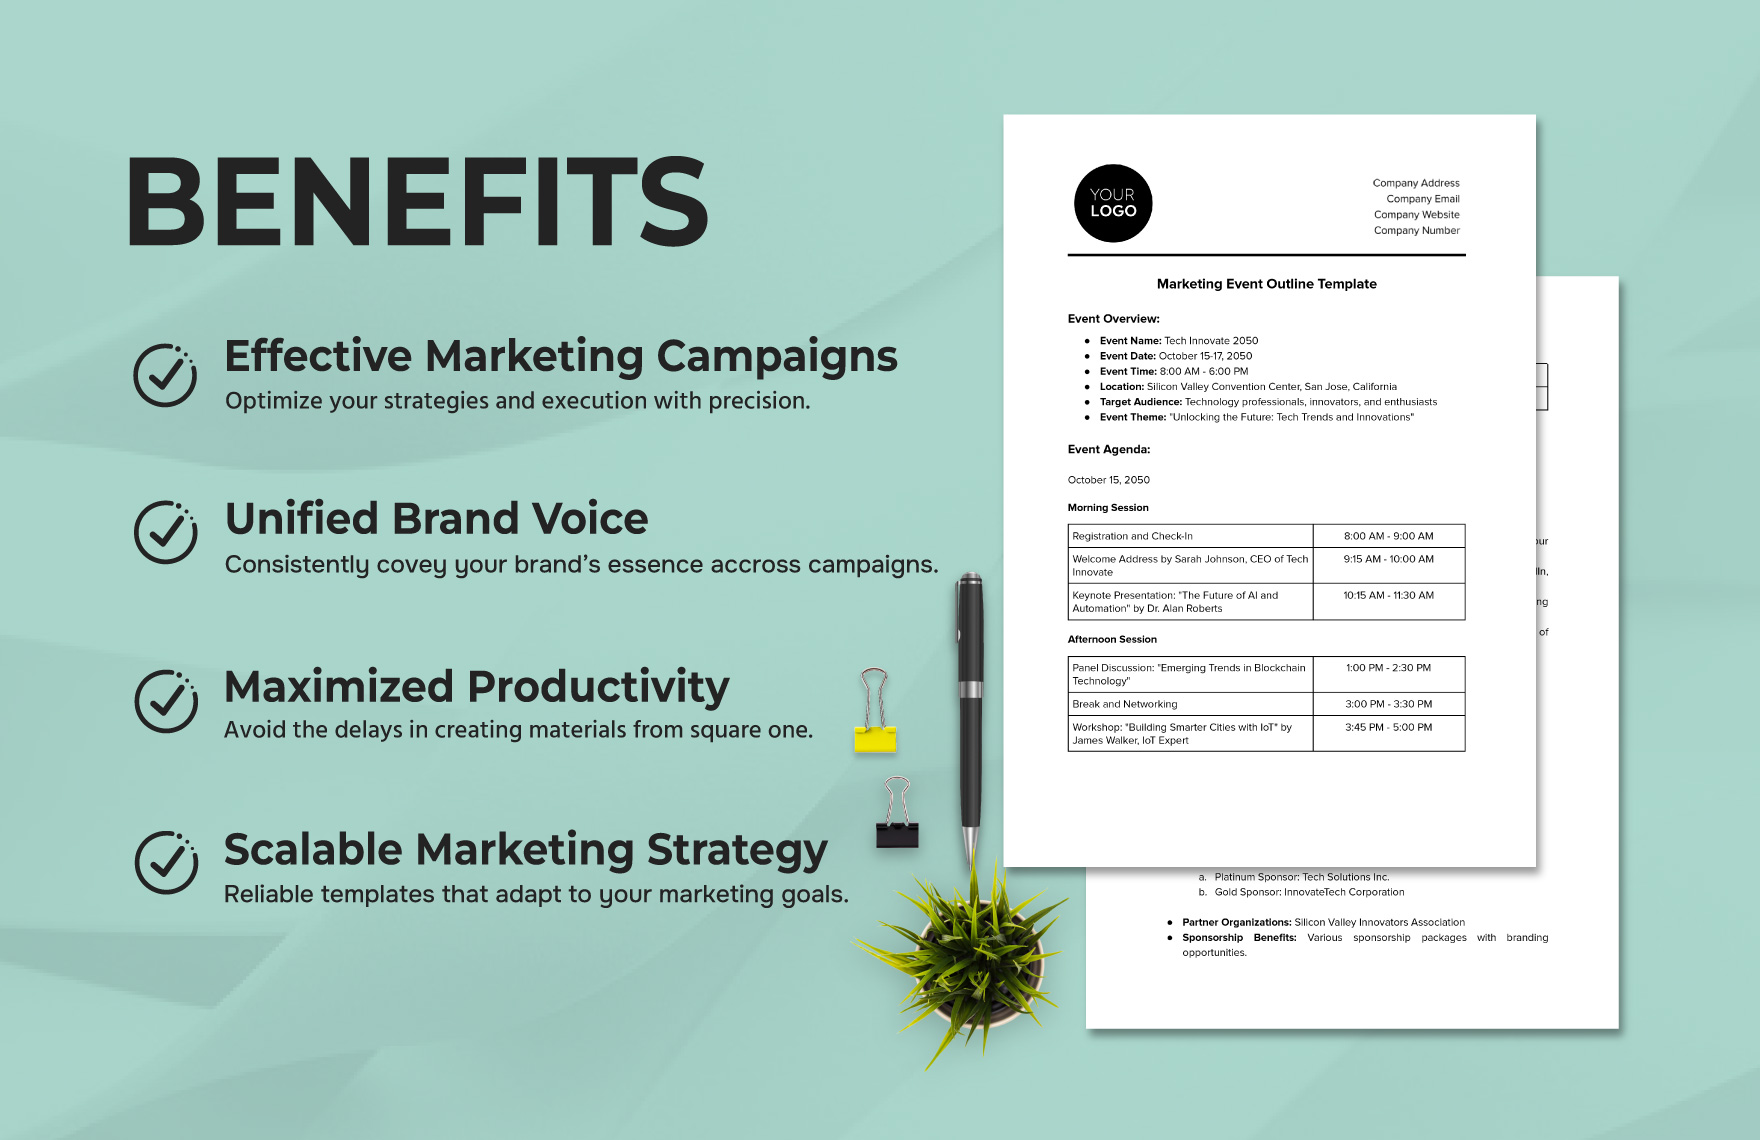 Marketing Event Outline Template